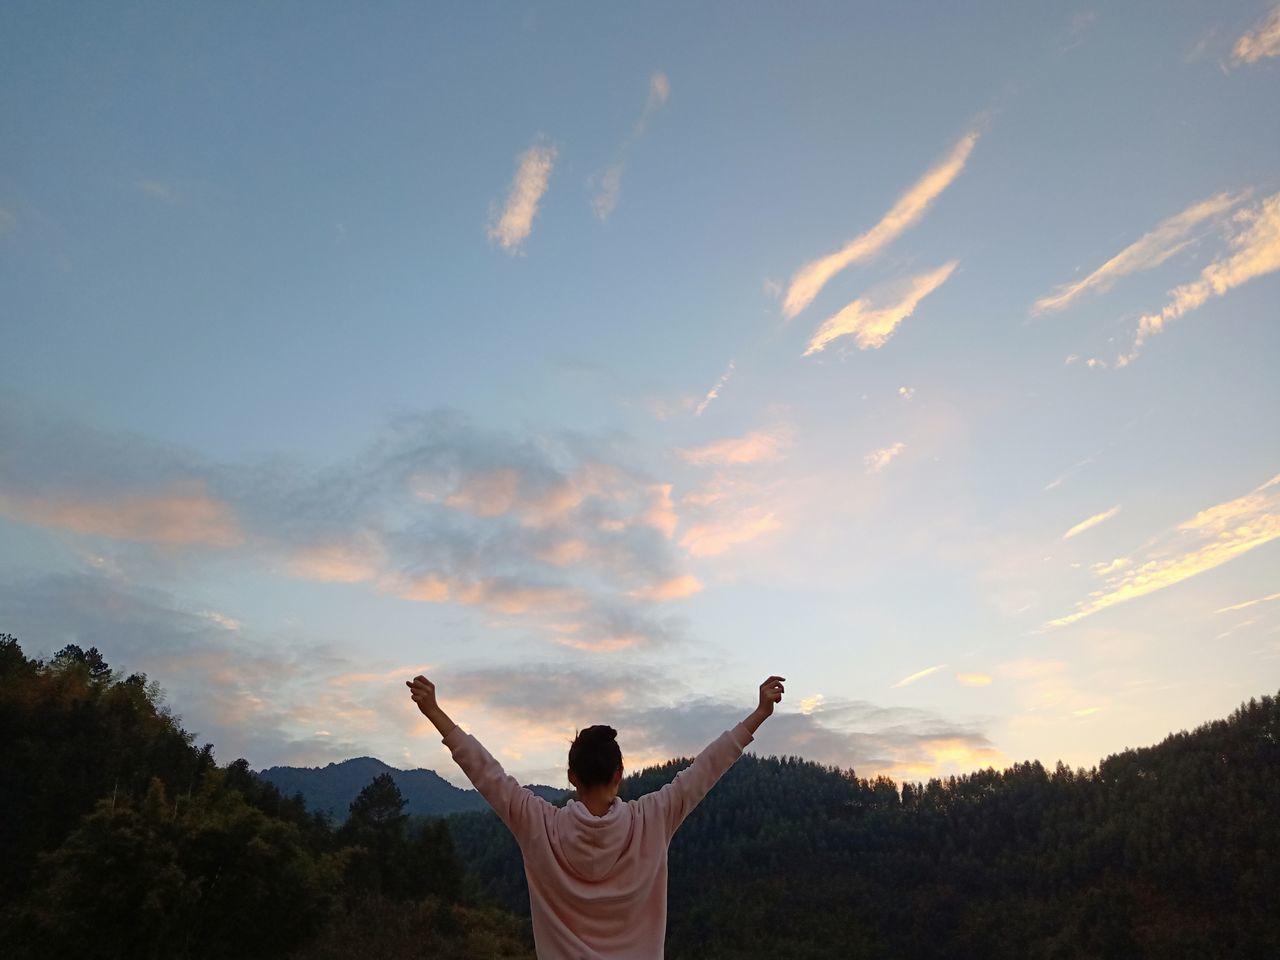 real people, sky, human arm, one person, cloud - sky, arms raised, beauty in nature, lifestyles, rear view, leisure activity, men, nature, non-urban scene, limb, scenics - nature, standing, plant, tree, carefree, outdoors, excitement